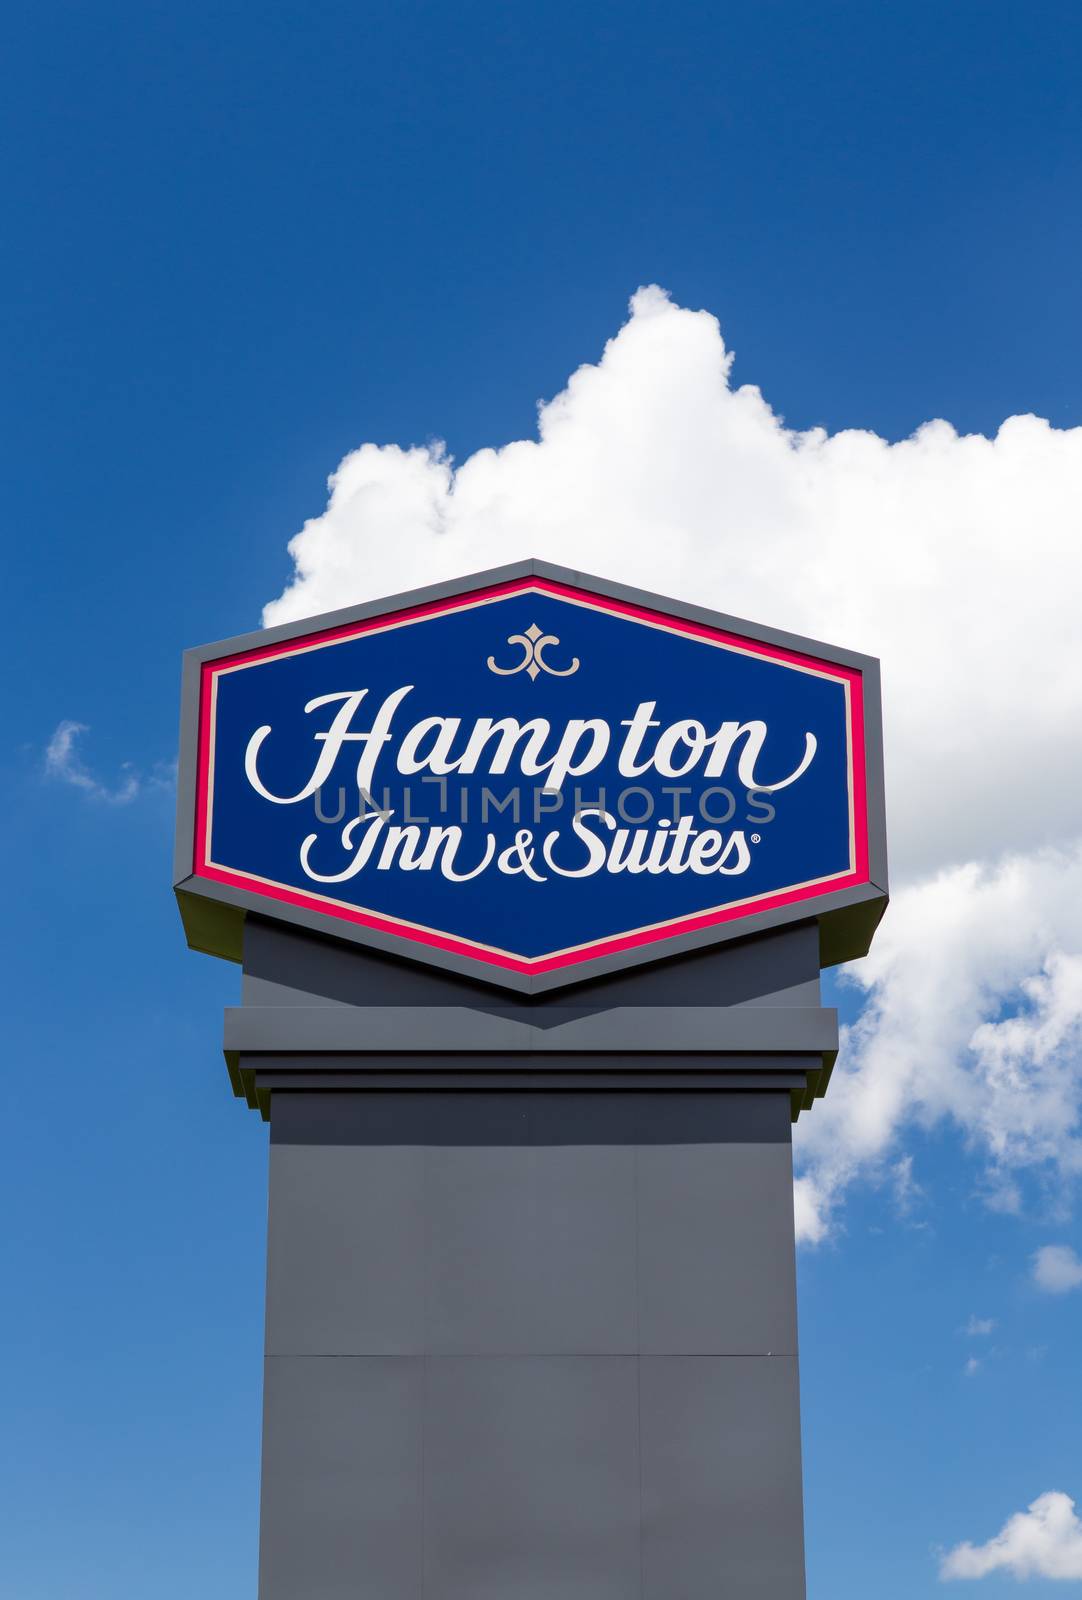 Hampton Inn and Suites Sign by wolterk